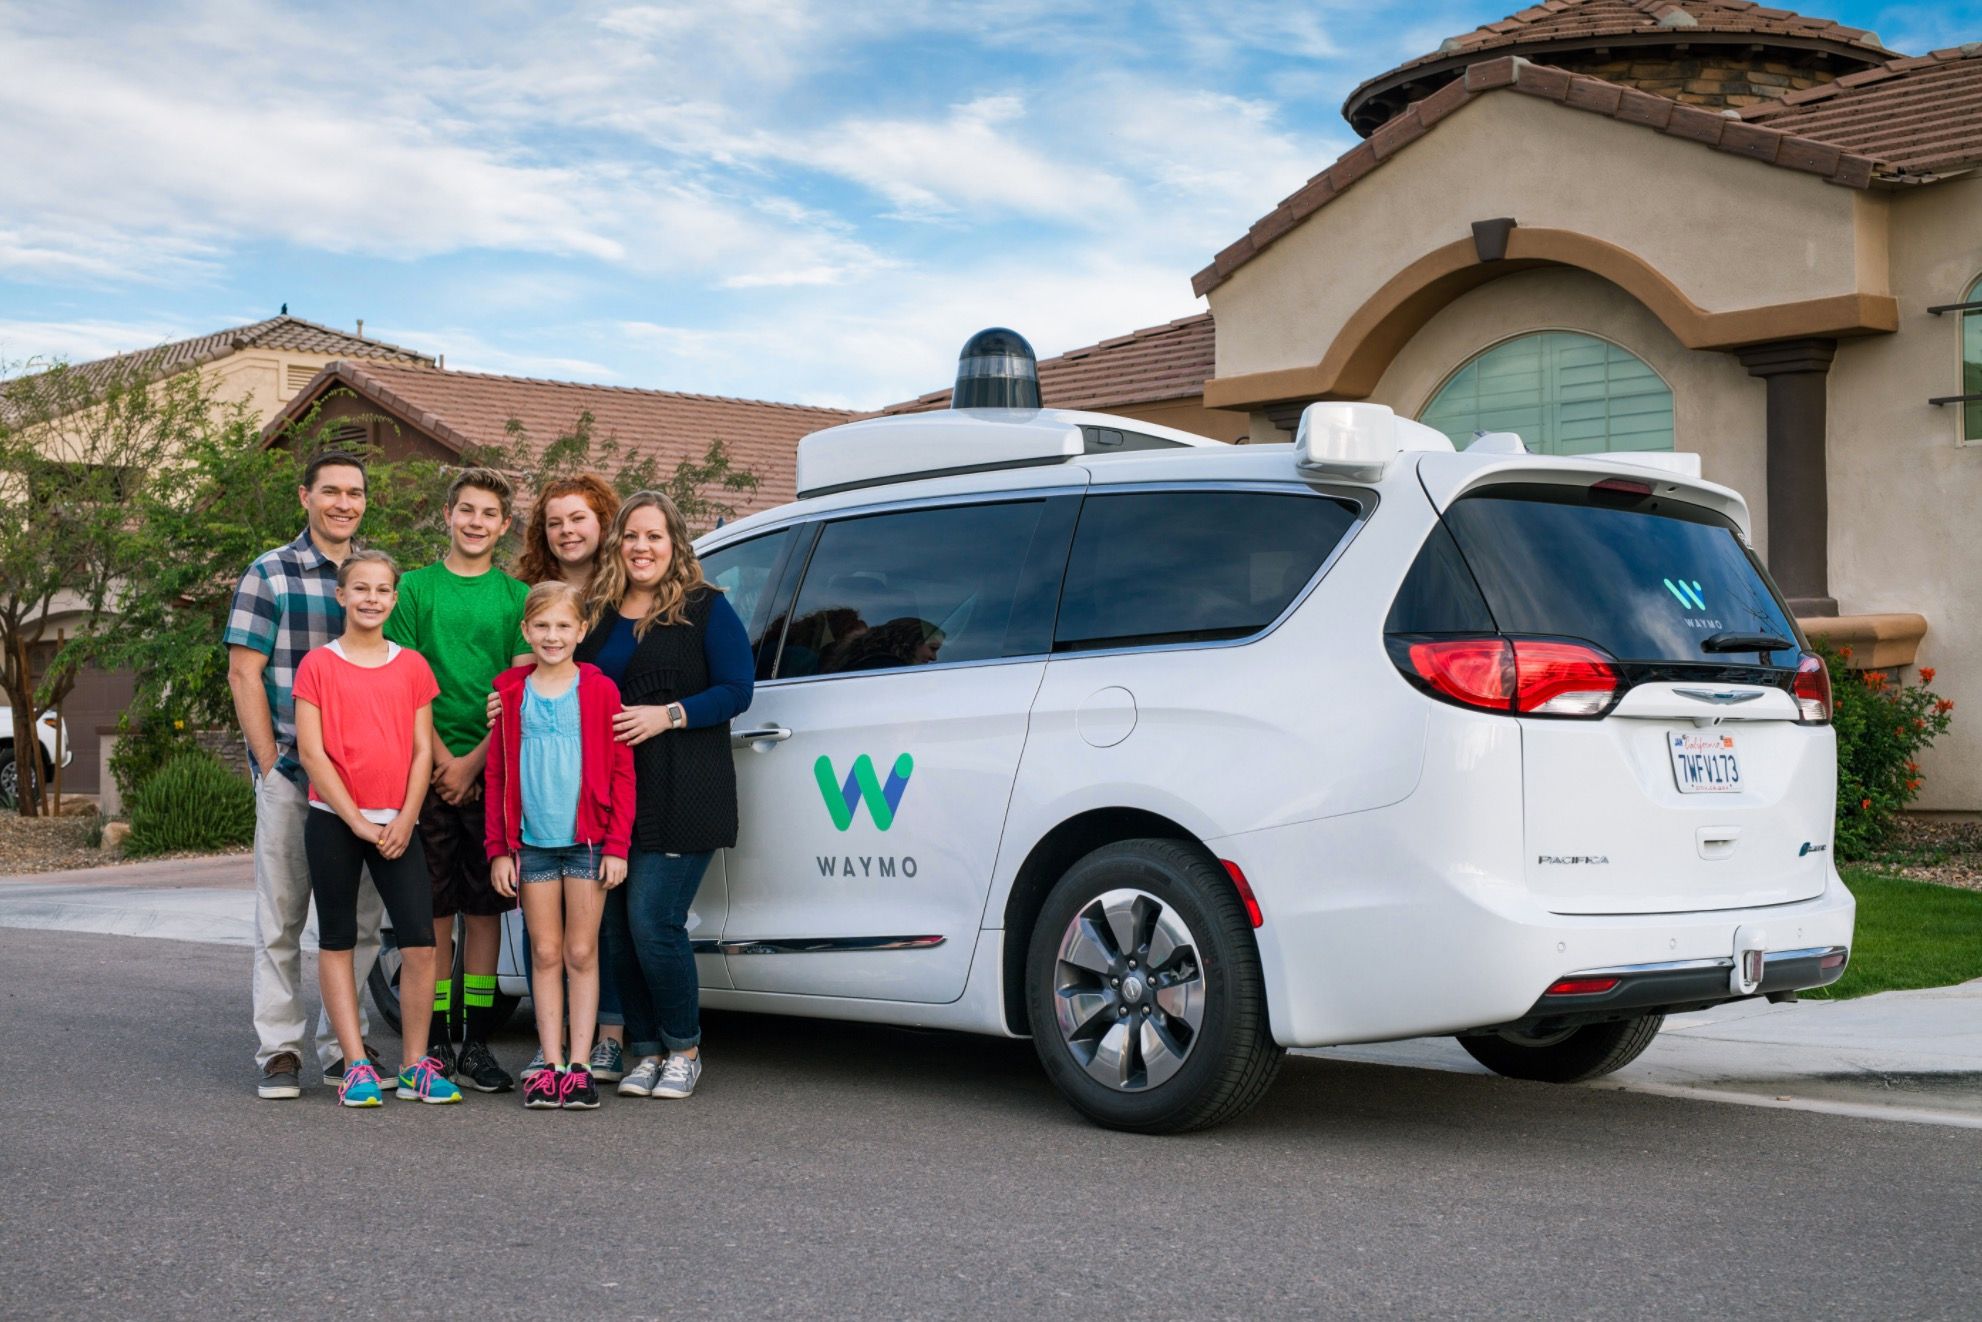 google waymo offers self driving car rides to public for first time image 2